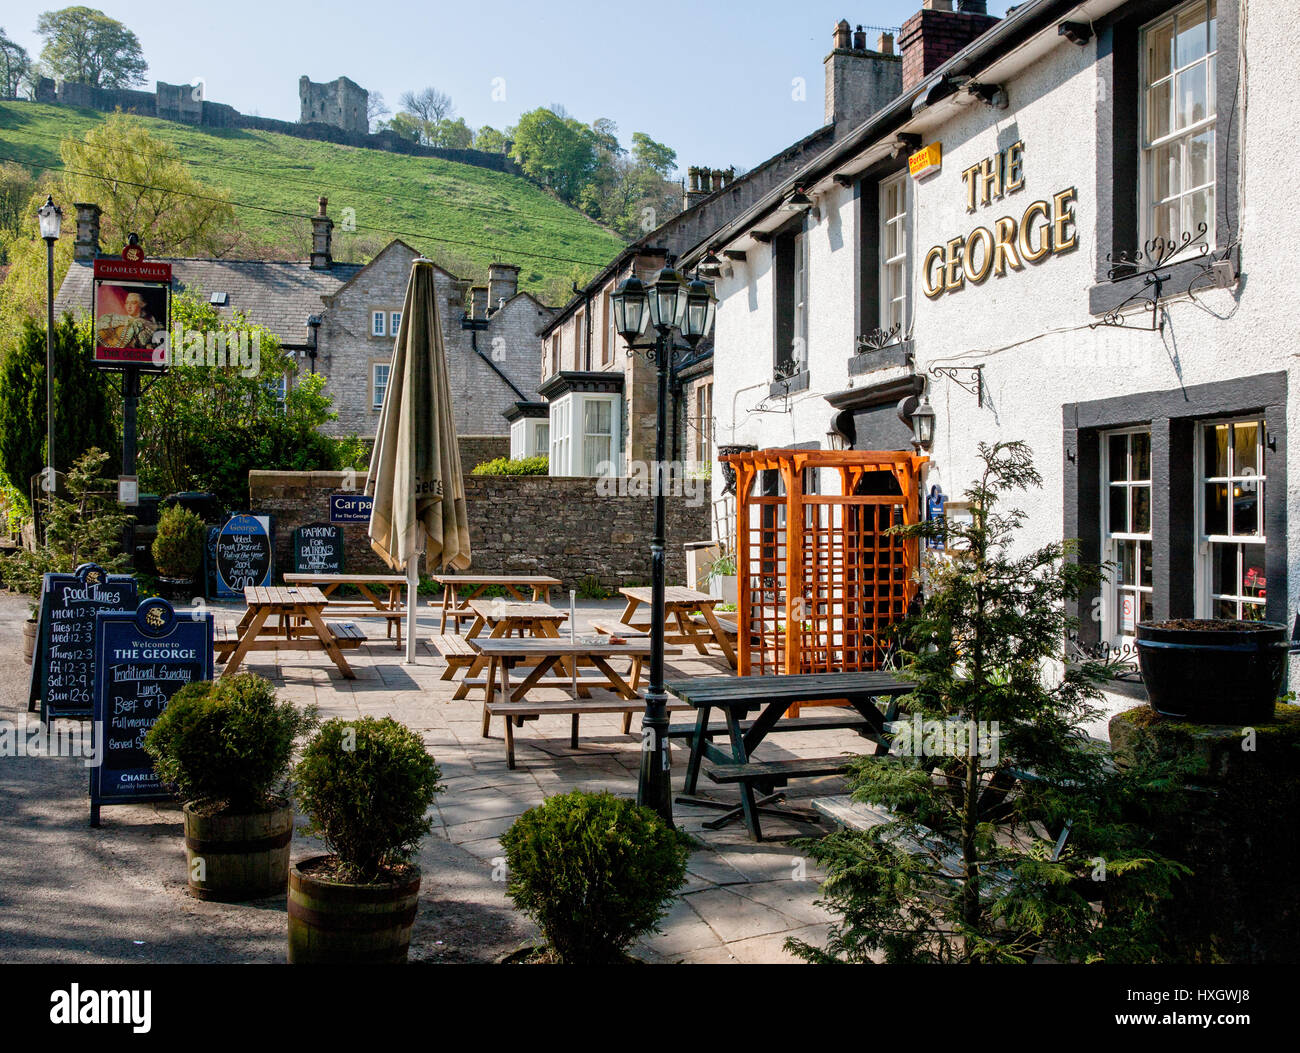 The George Inn at Castleton in the derbyshire Peak District with Peveril Castle on the hill behind the village Stock Photo